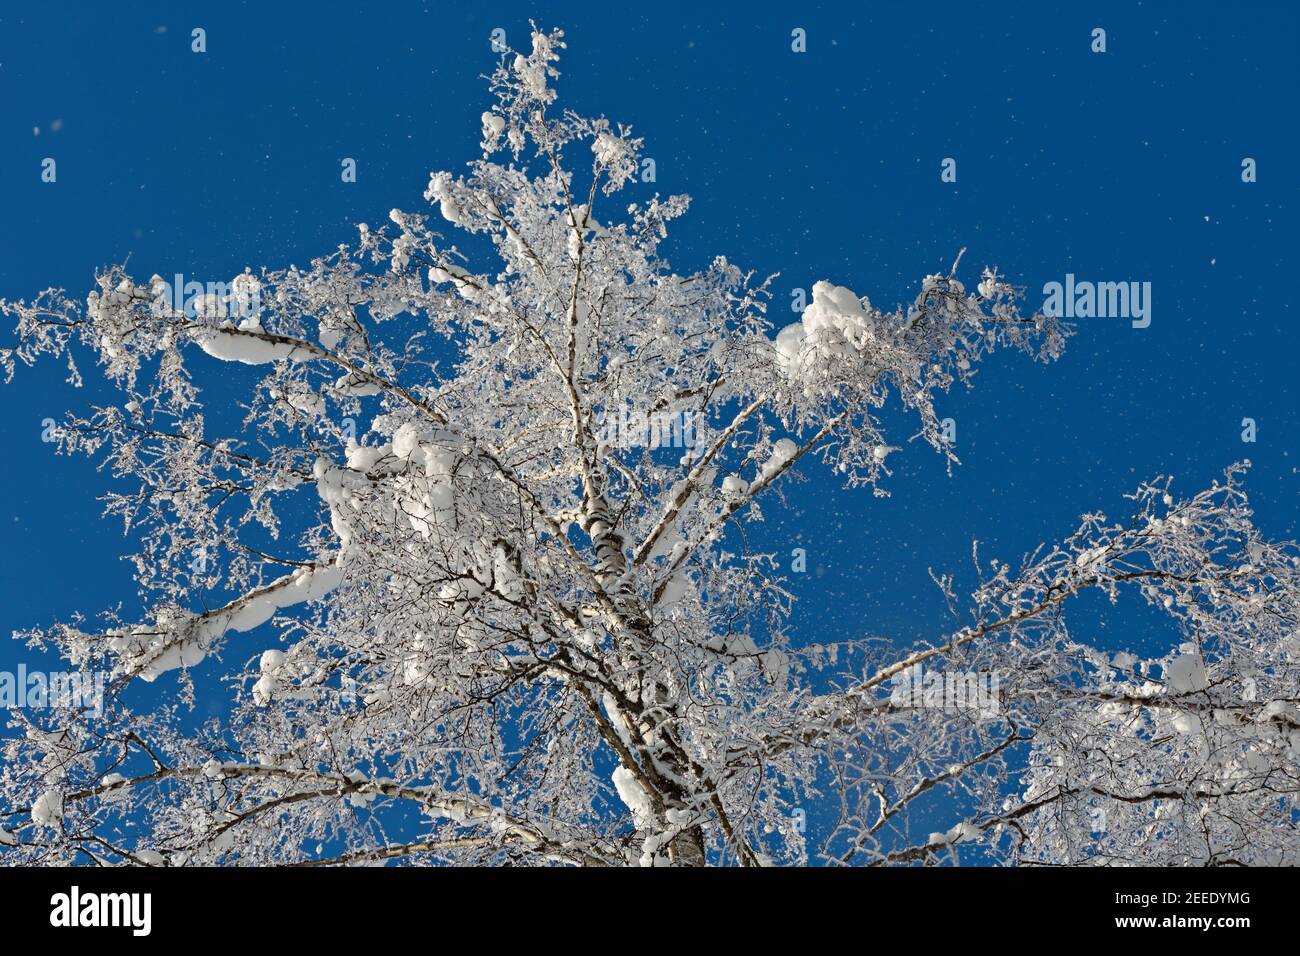 Frosty birch tree with a lot of snowflakes in the air against the clear blue sky Stock Photo